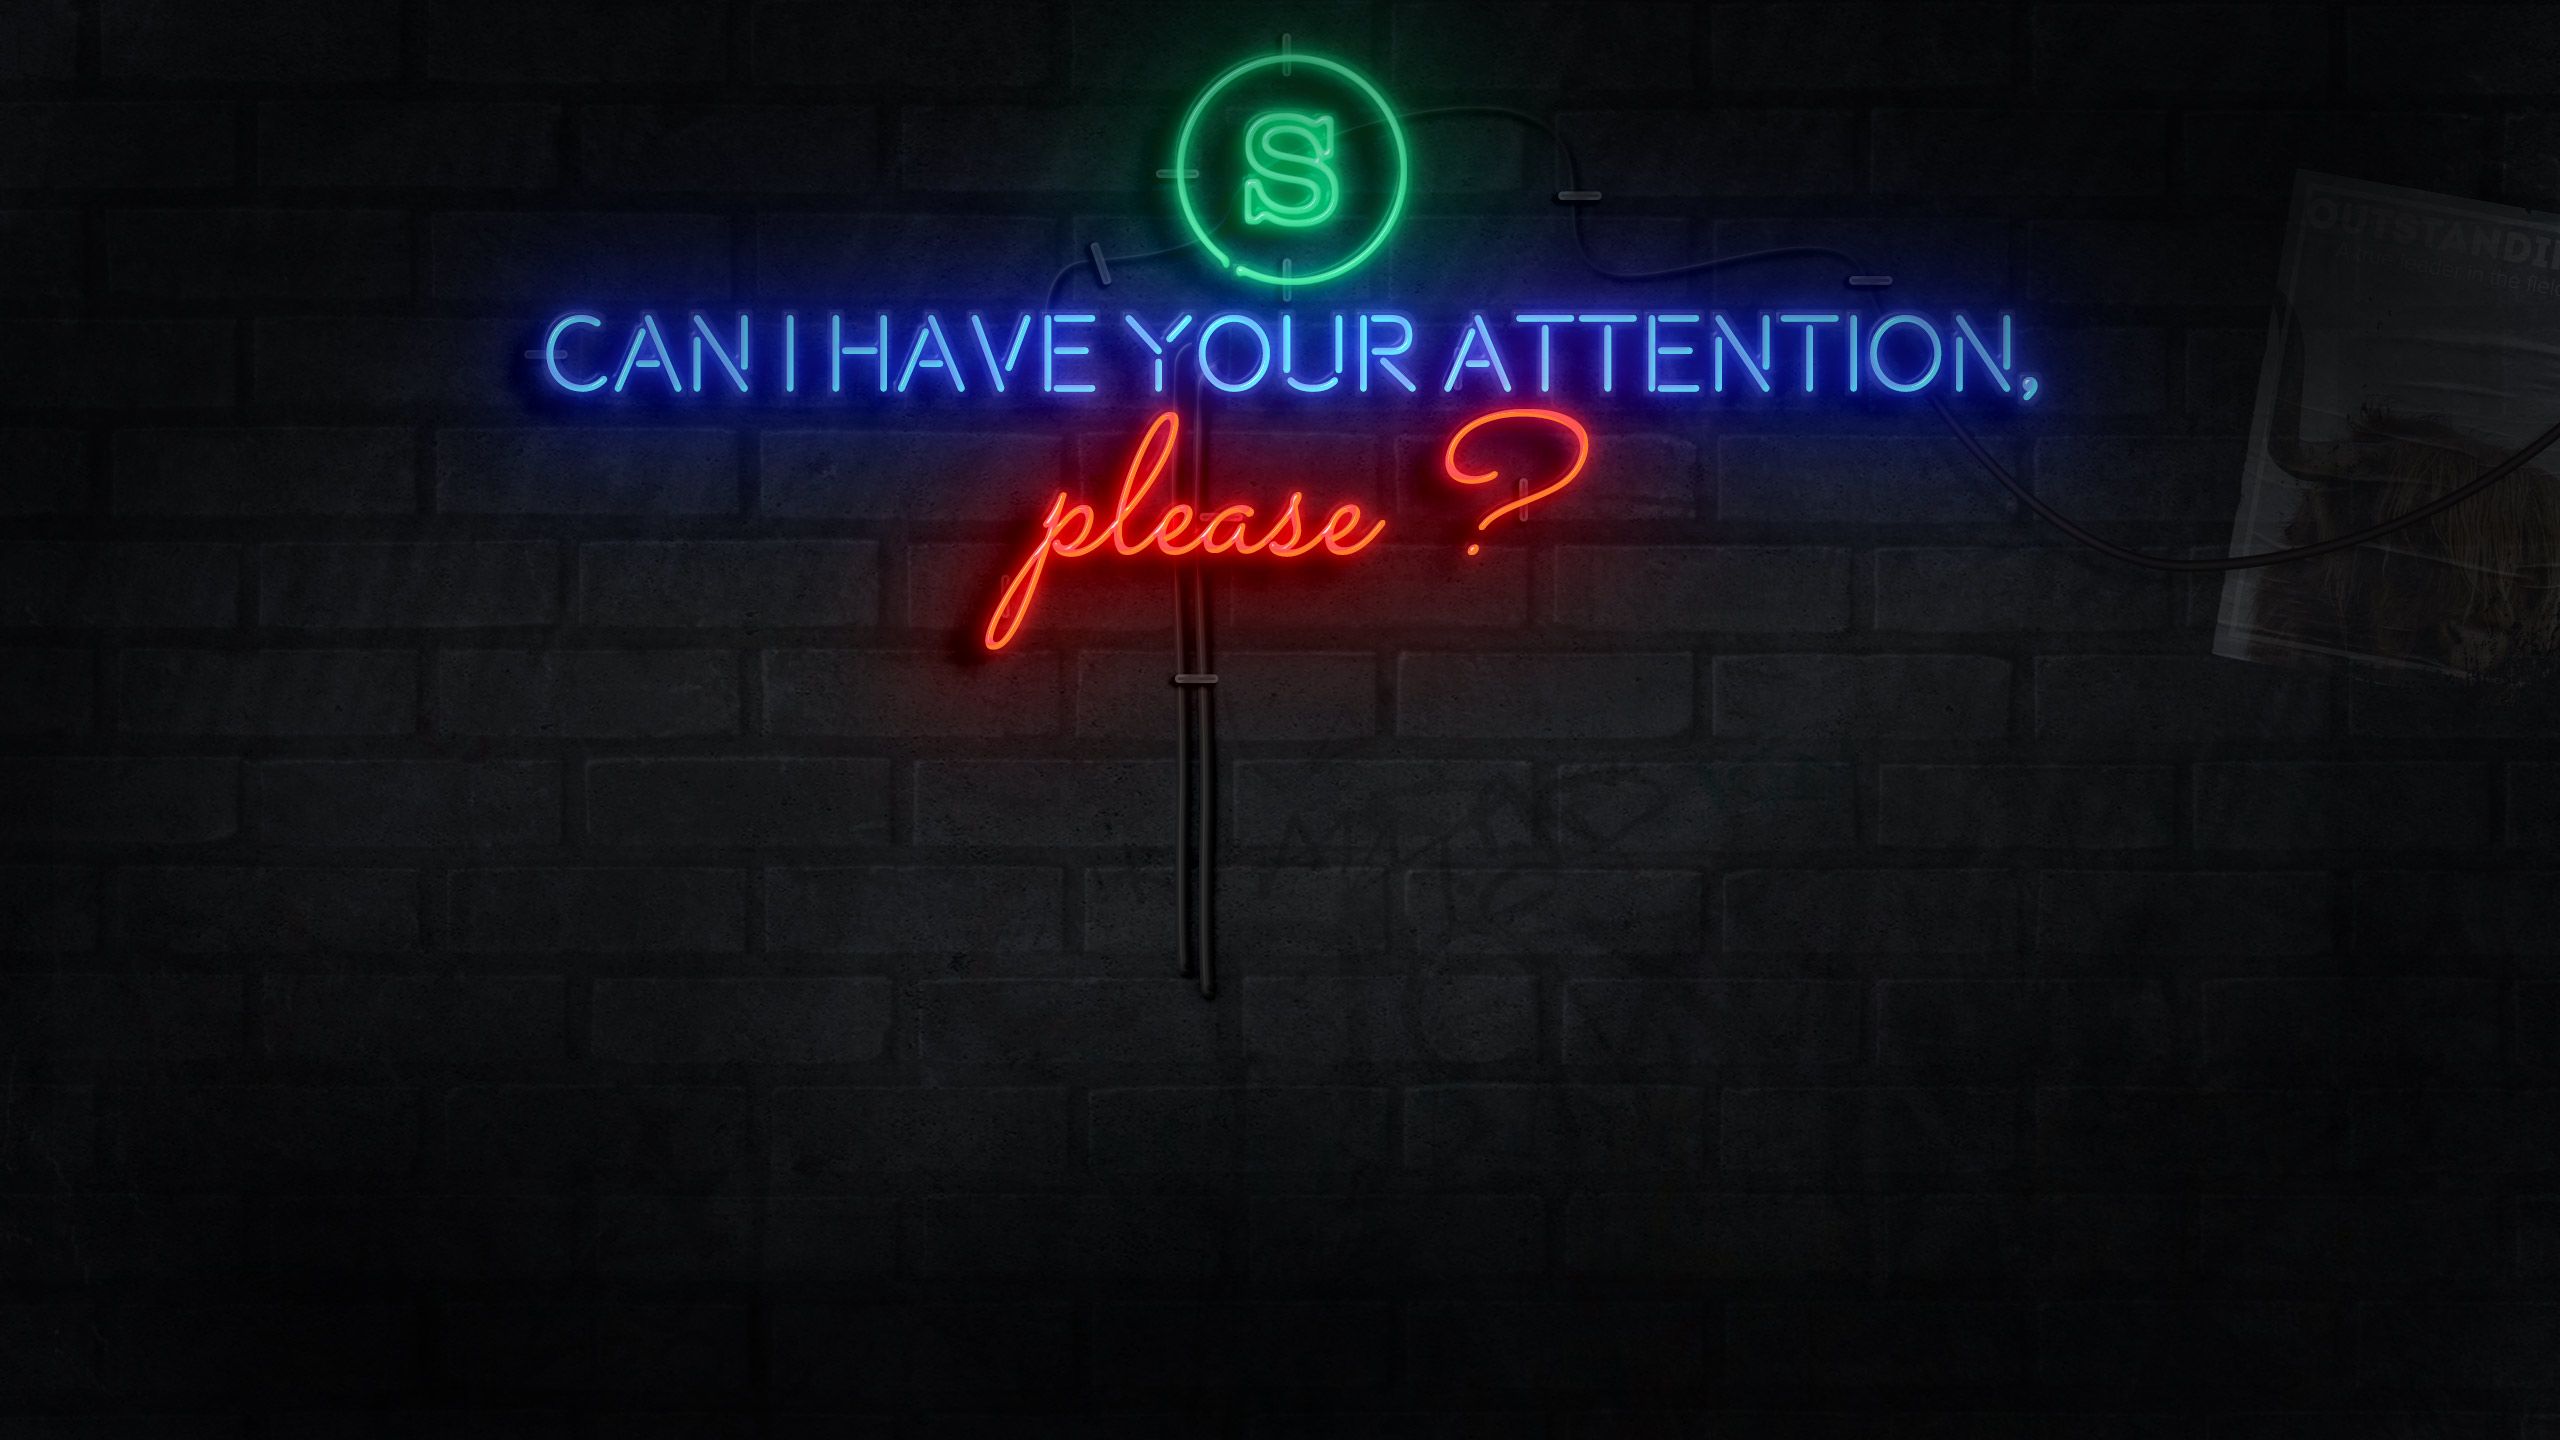 Can I have your attention please. Sign in neon.